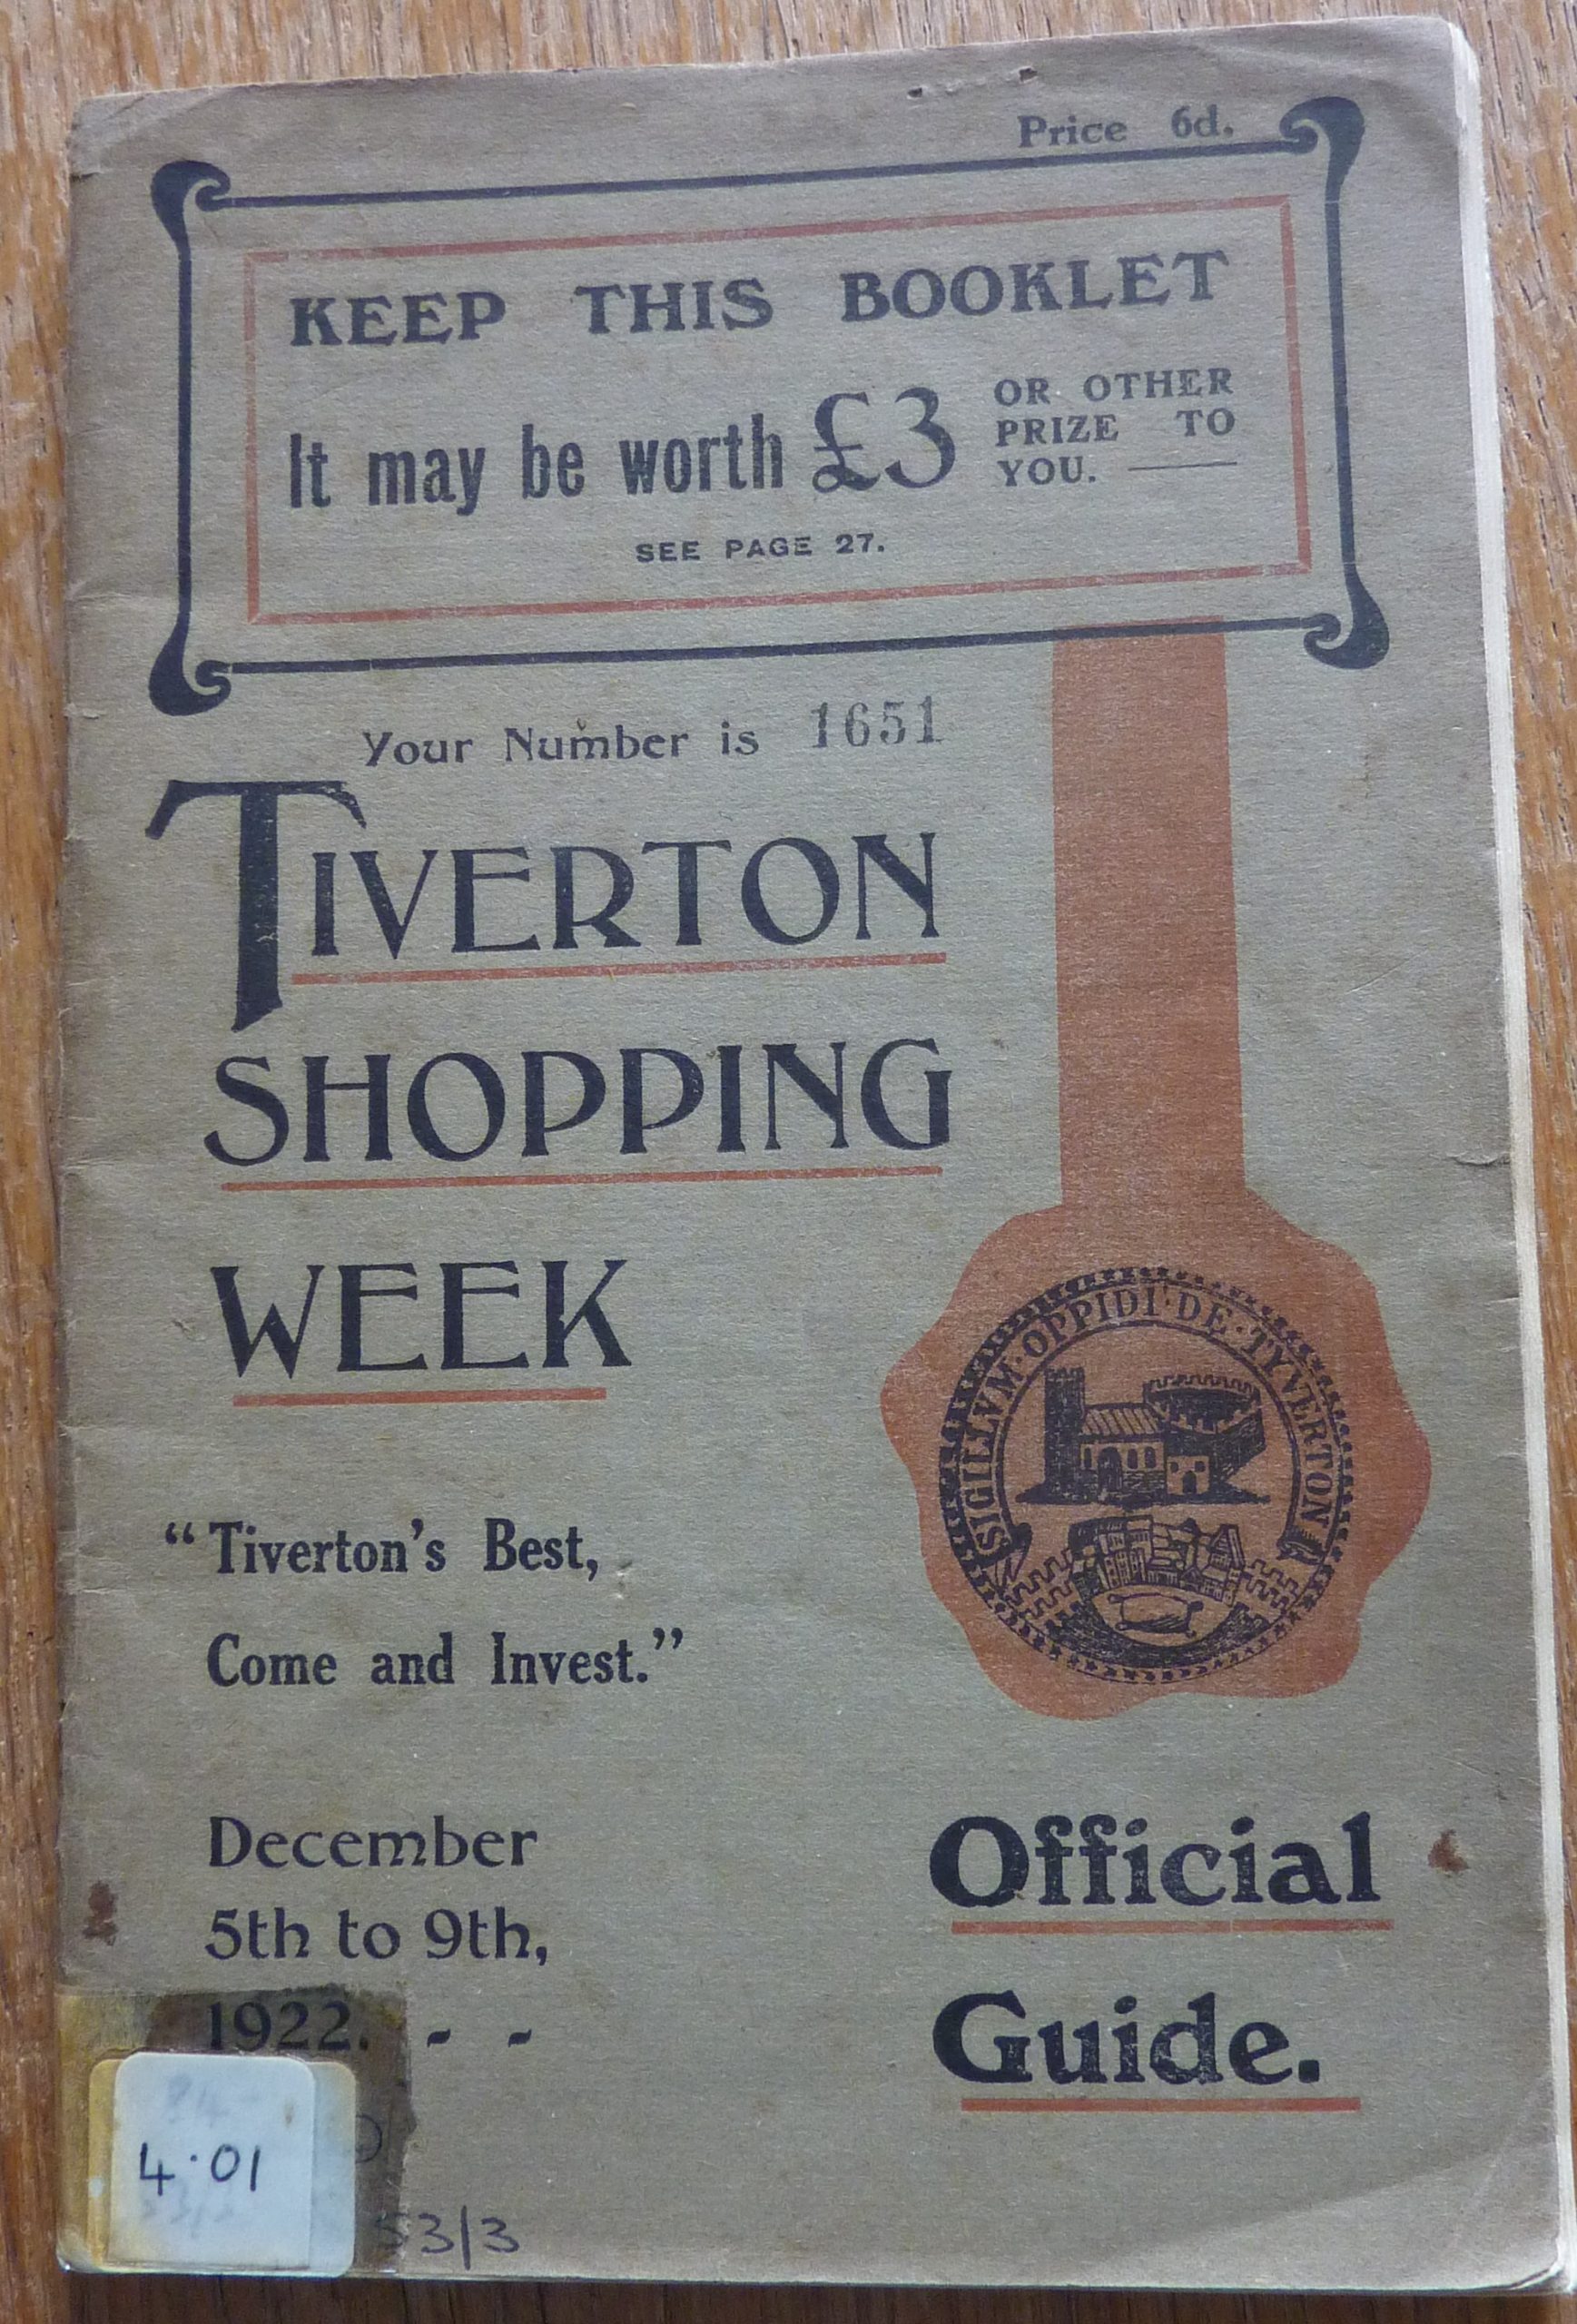 The front page of the Tiverton Shopping Week Official Guide. It shows the market seal and a tag line 'Tiverton's Best, Come and Invest'.